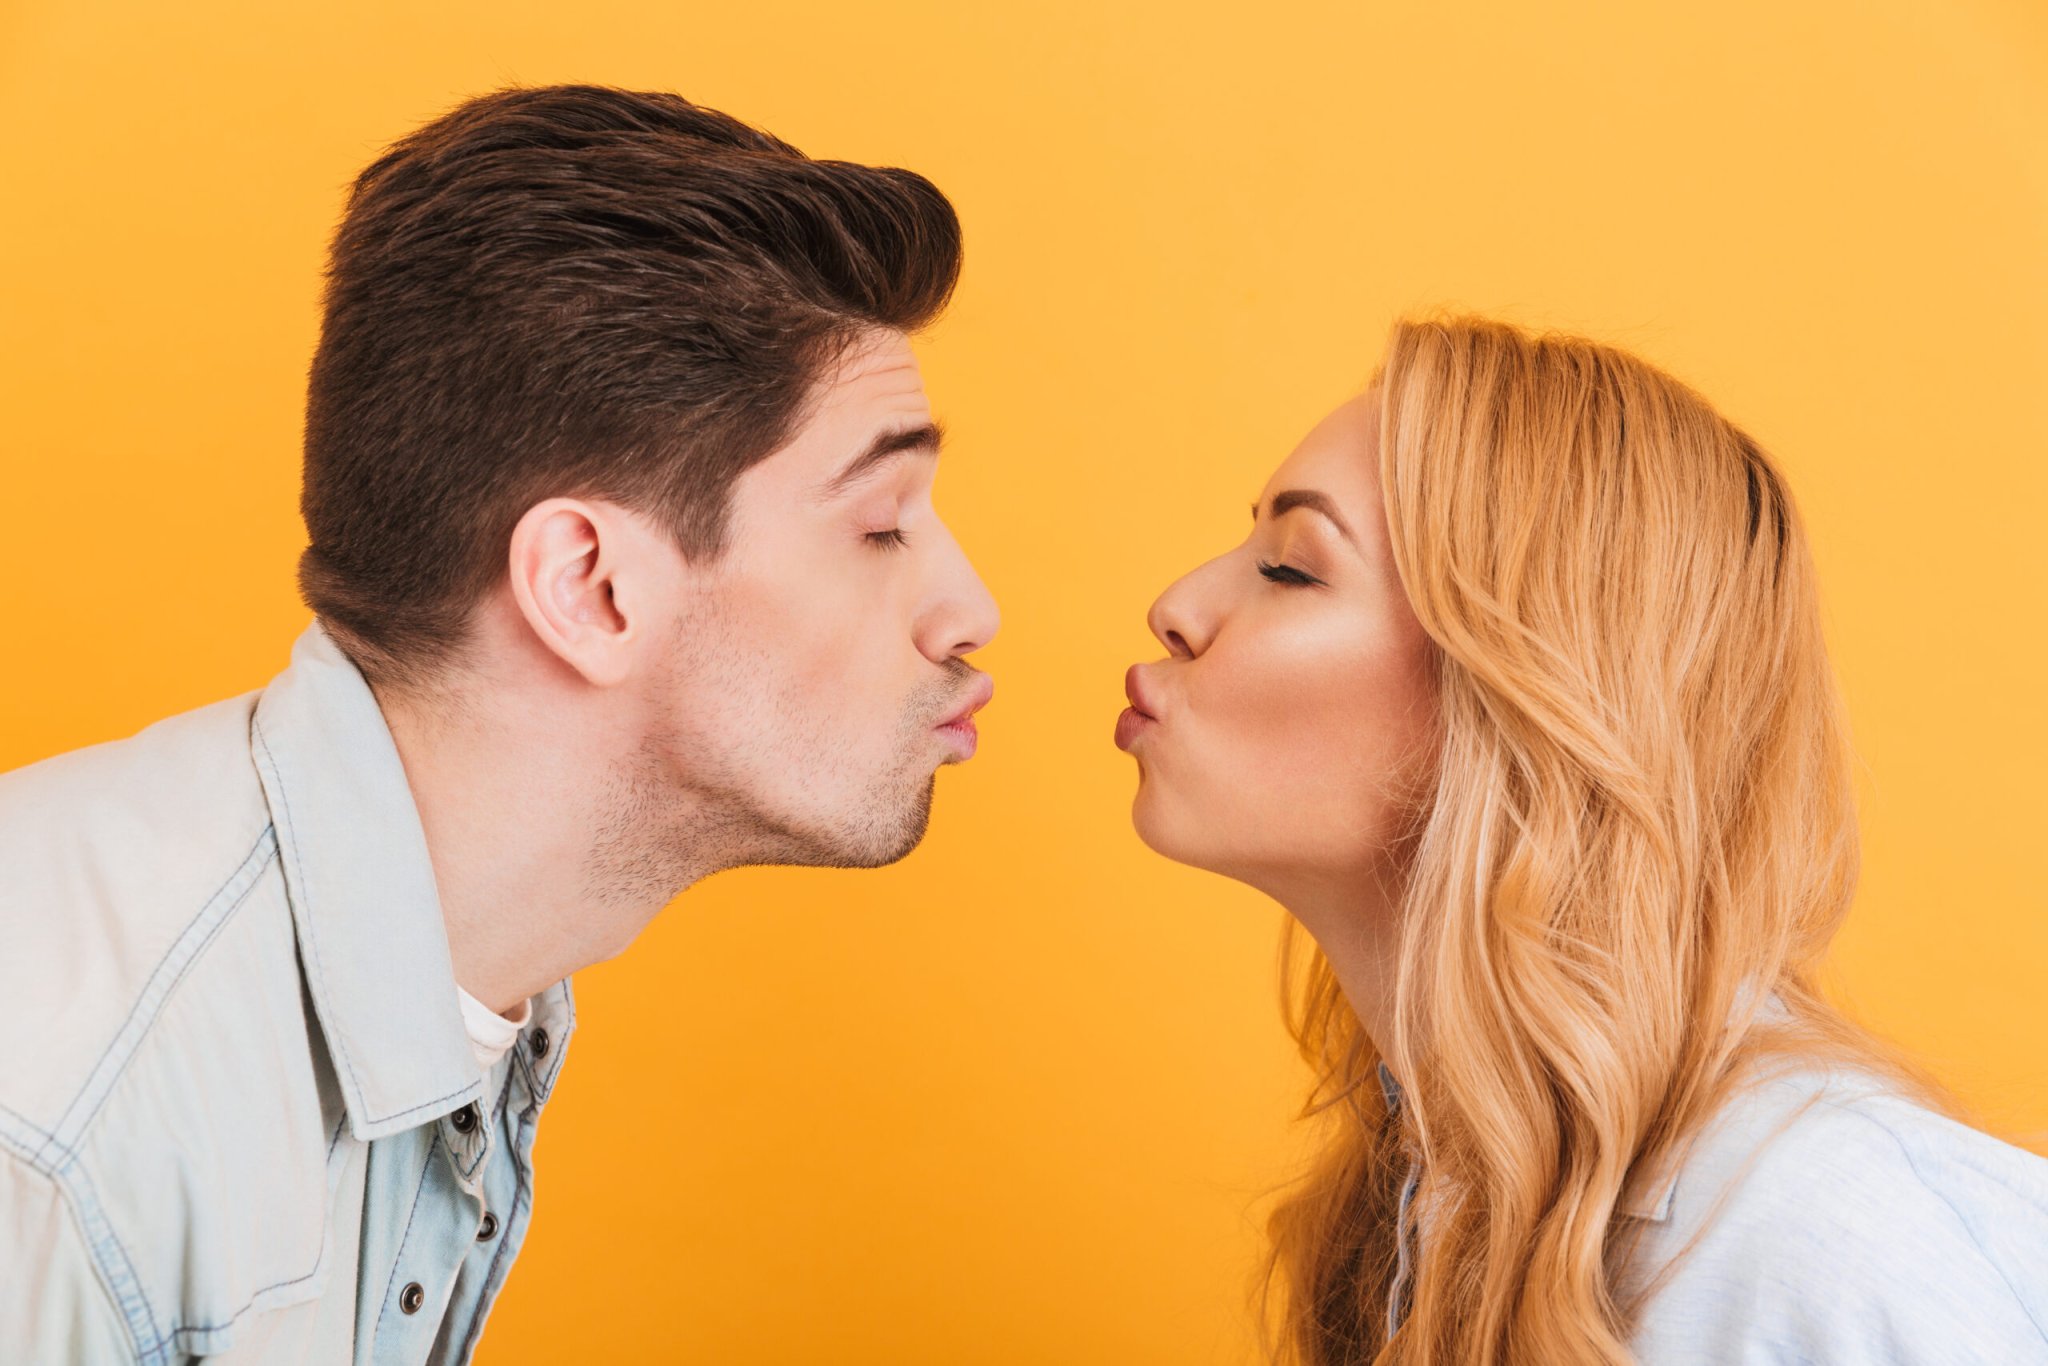 Apparently, It's Super Easy To Transmit Cavities And Gum Diseases While Kissing